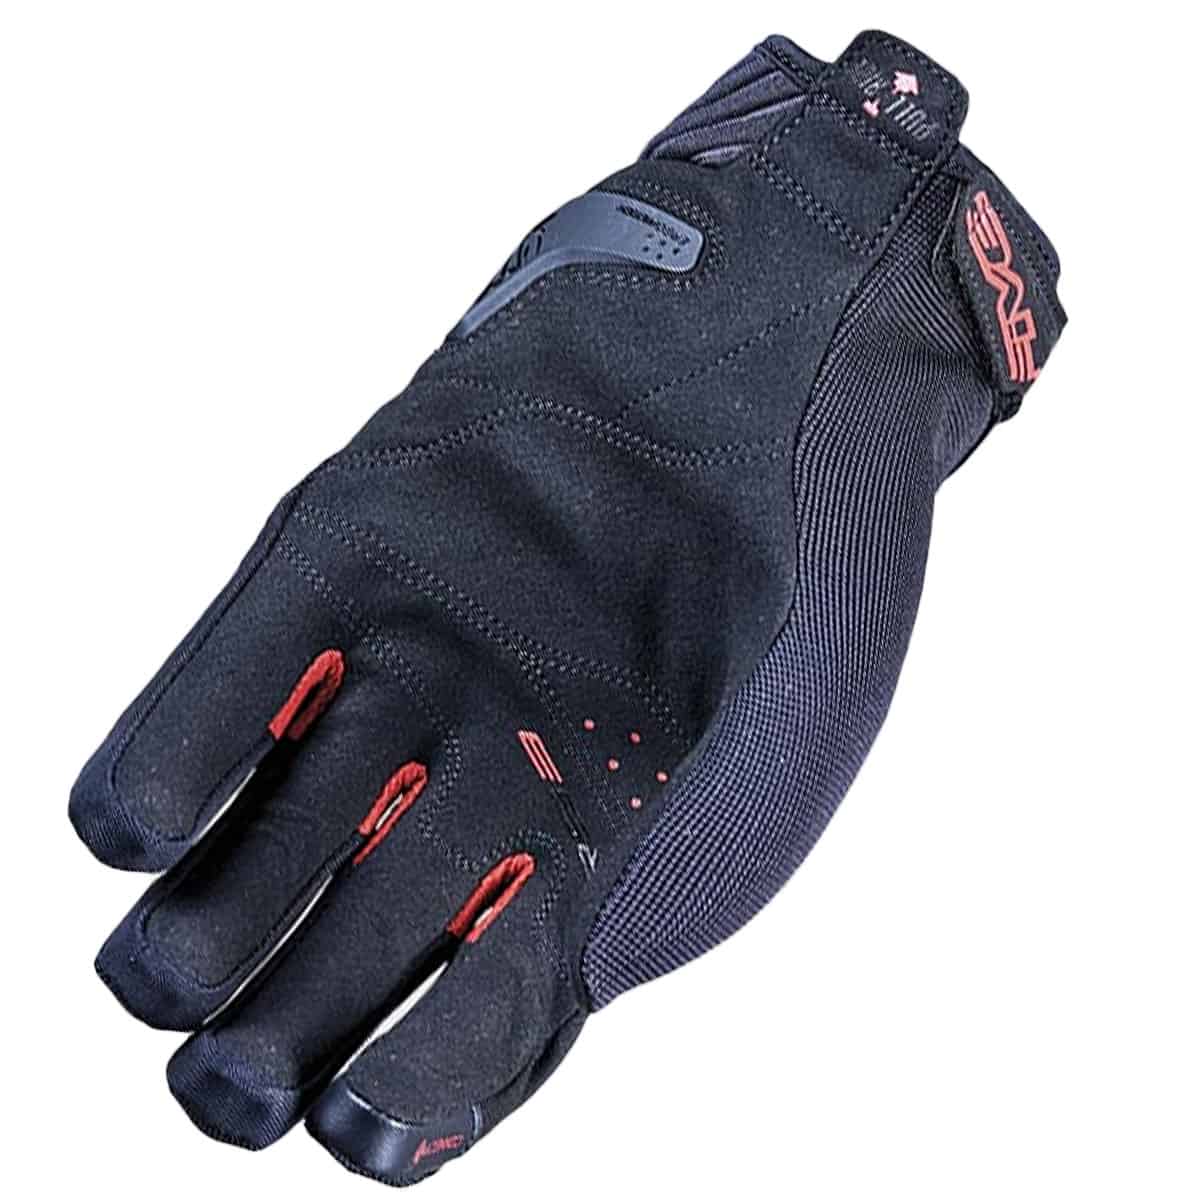 Five RS3 Evo Motorbike Gloves: Urban Summer gloves with a hint of off-road styling palm